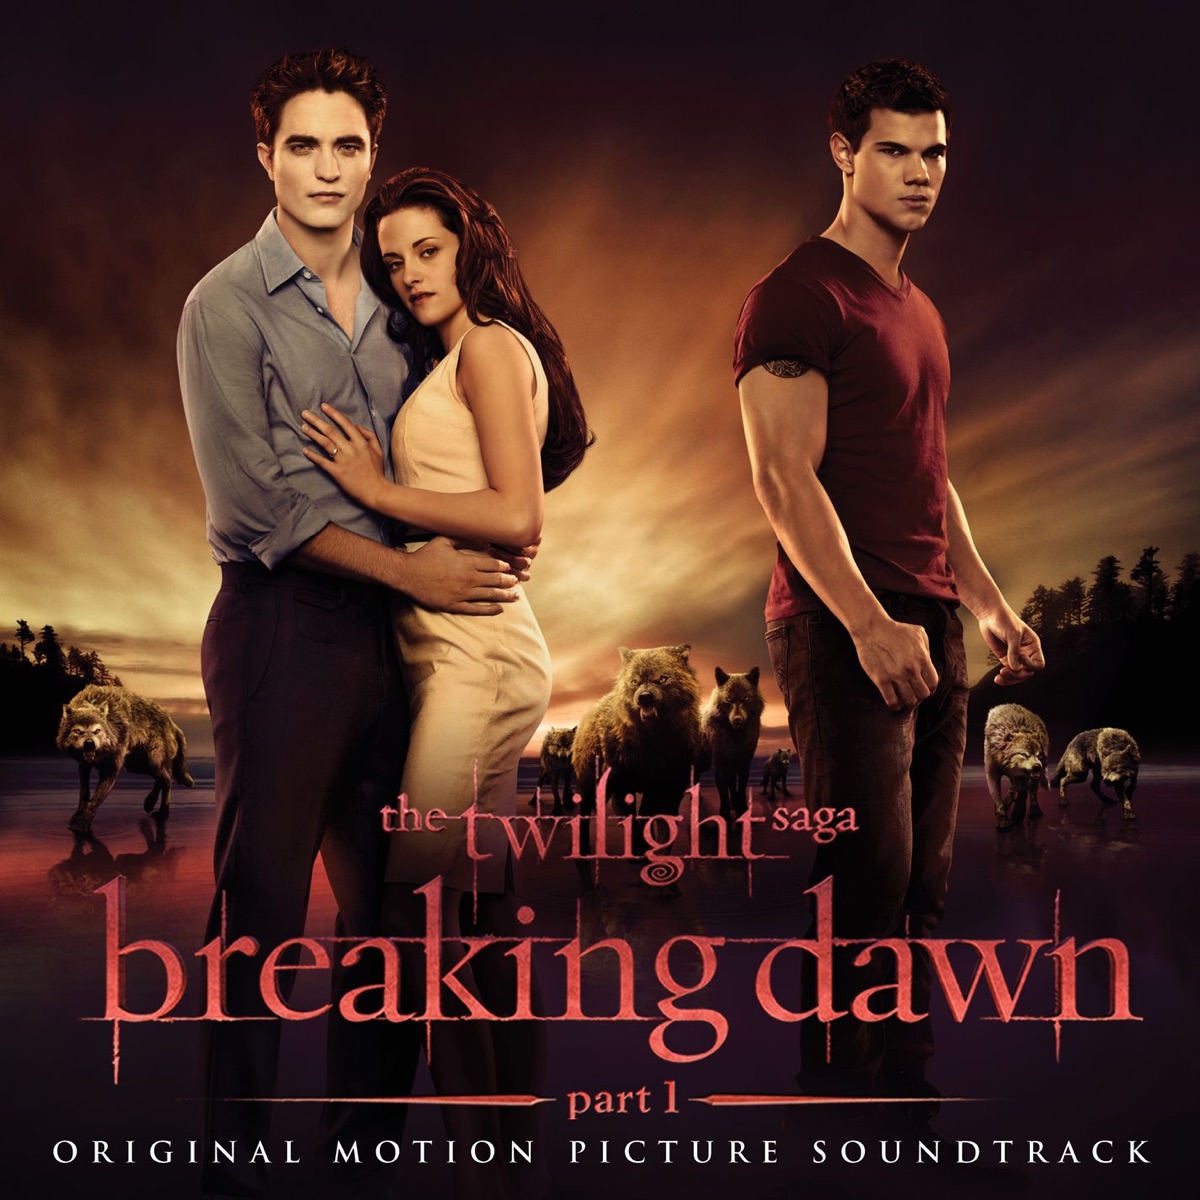 The Twilight Saga: Breaking Dawn, Pt. 1 (Original Motion Picture  Soundtrack) [Deluxe Version] - Album by Various Artists - Apple Music